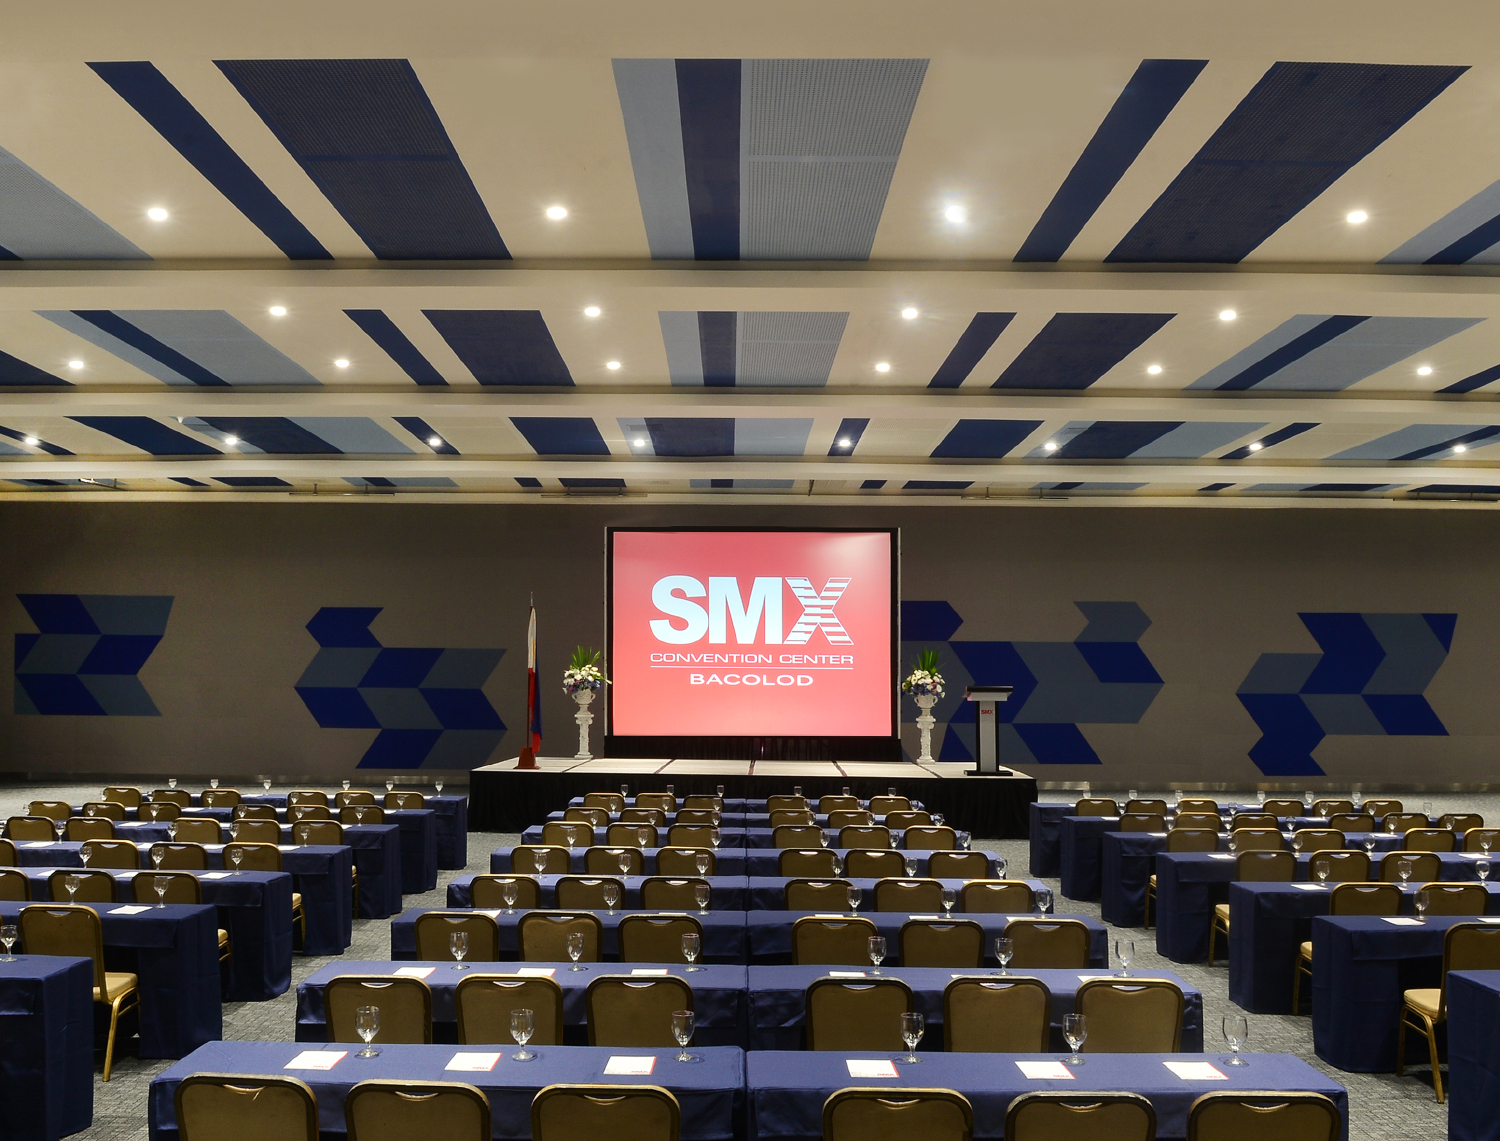 SMX Convention Center Bacolod